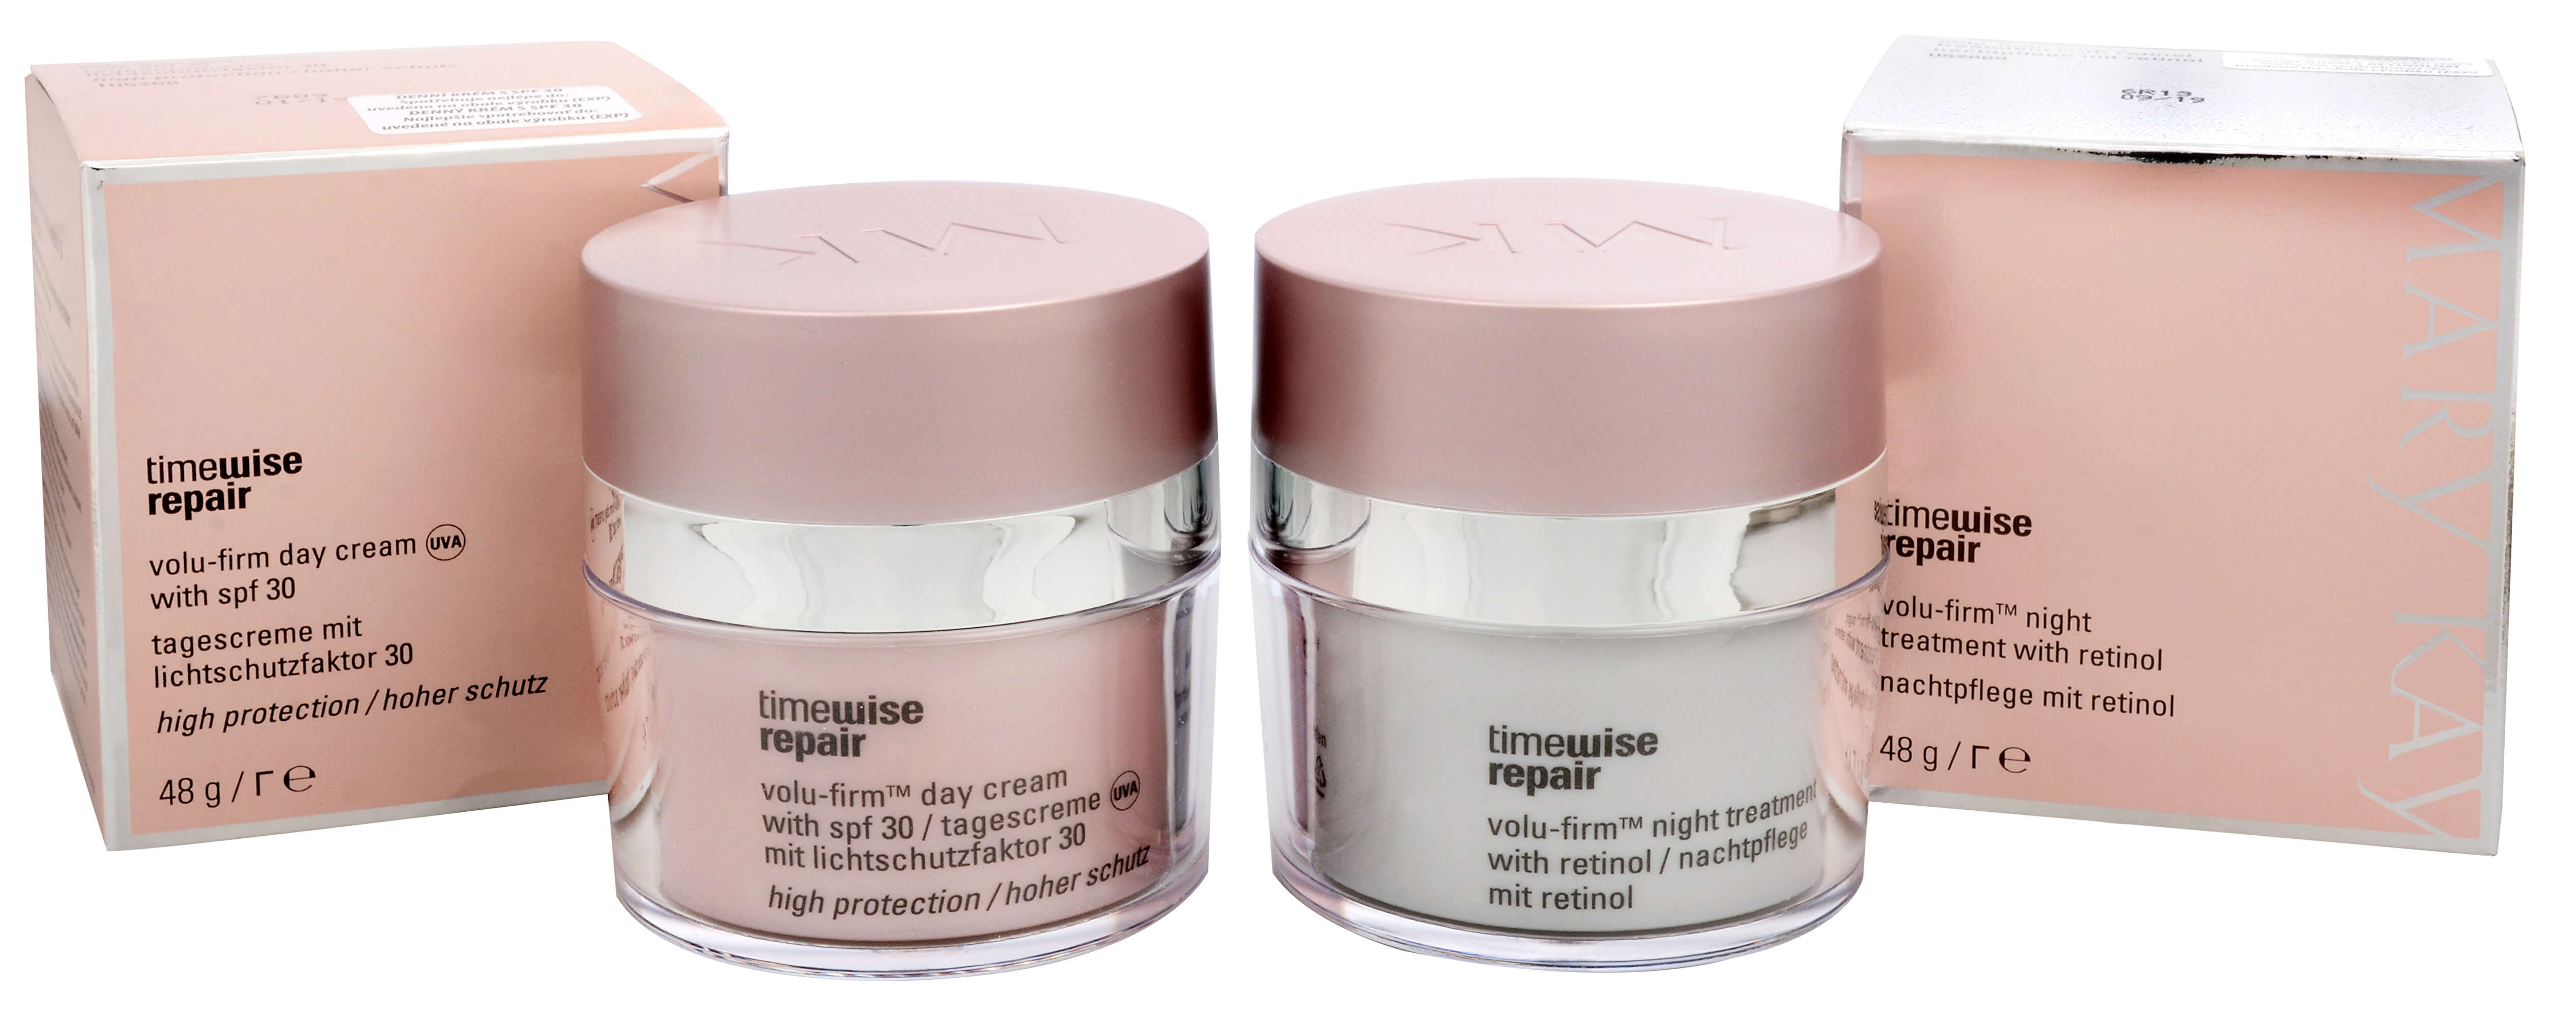 Mary Kay Duo péče pro den a noc TimeWise Repair (Volu-Firm Day Cream & Night Treatment)